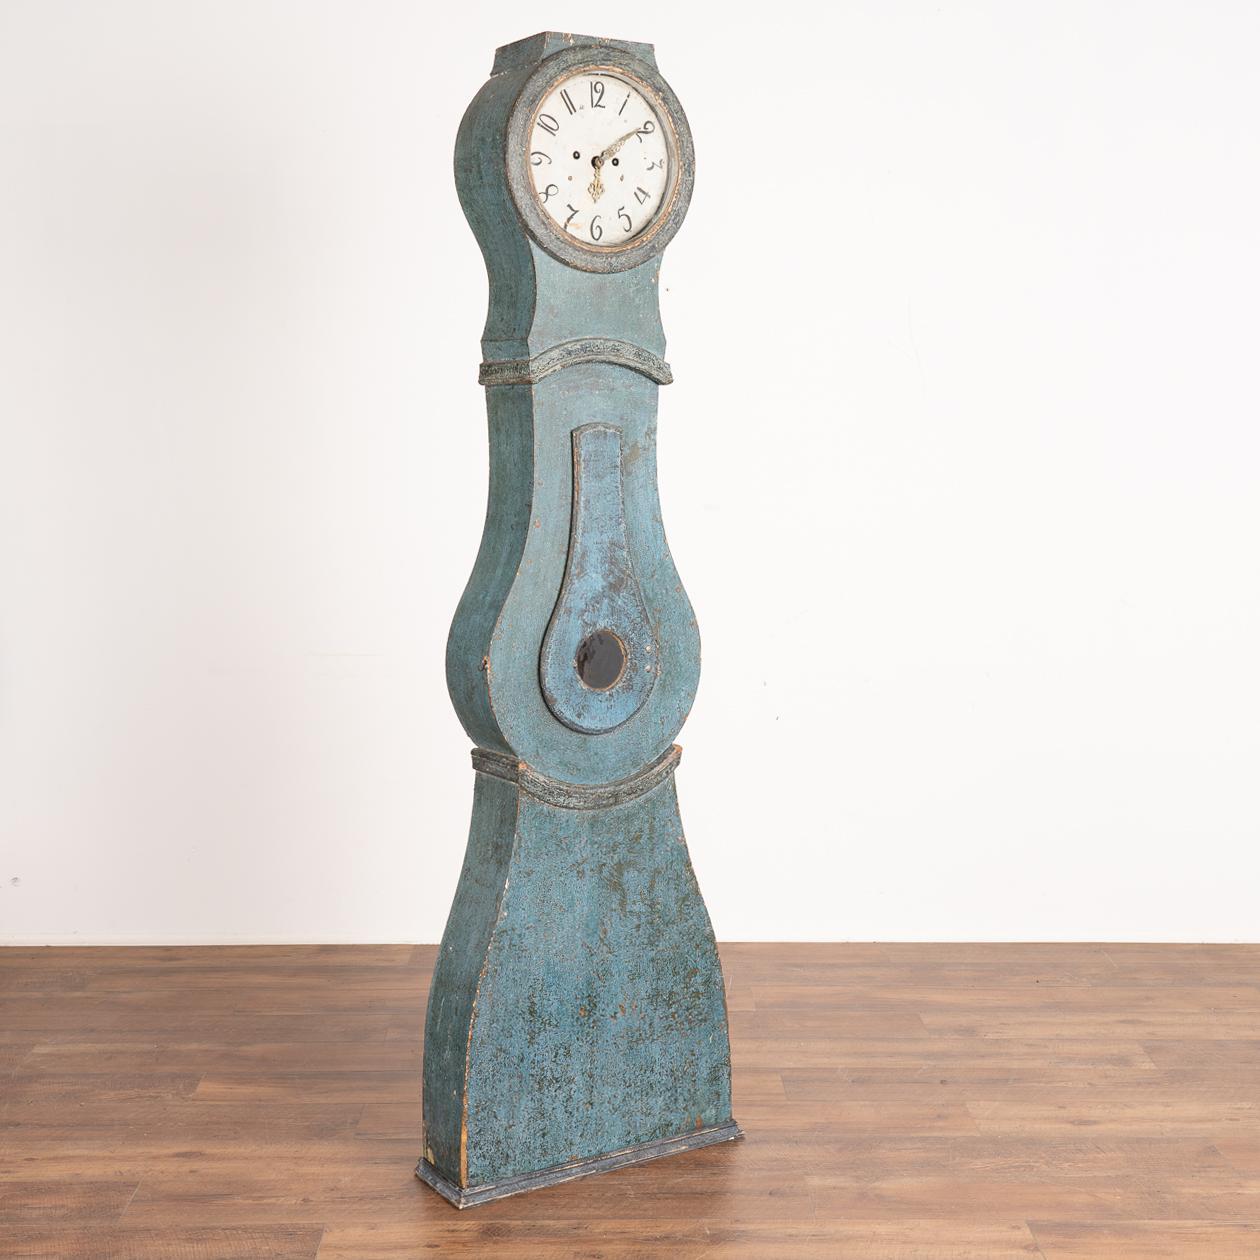 Graceful curves create the attractive silhouette of this Swedish mora grandfather clock.
Newer professionally applied blue layered finish (with slight white and green undertones), lightly distressed to fit age of clock.
Original clock face and